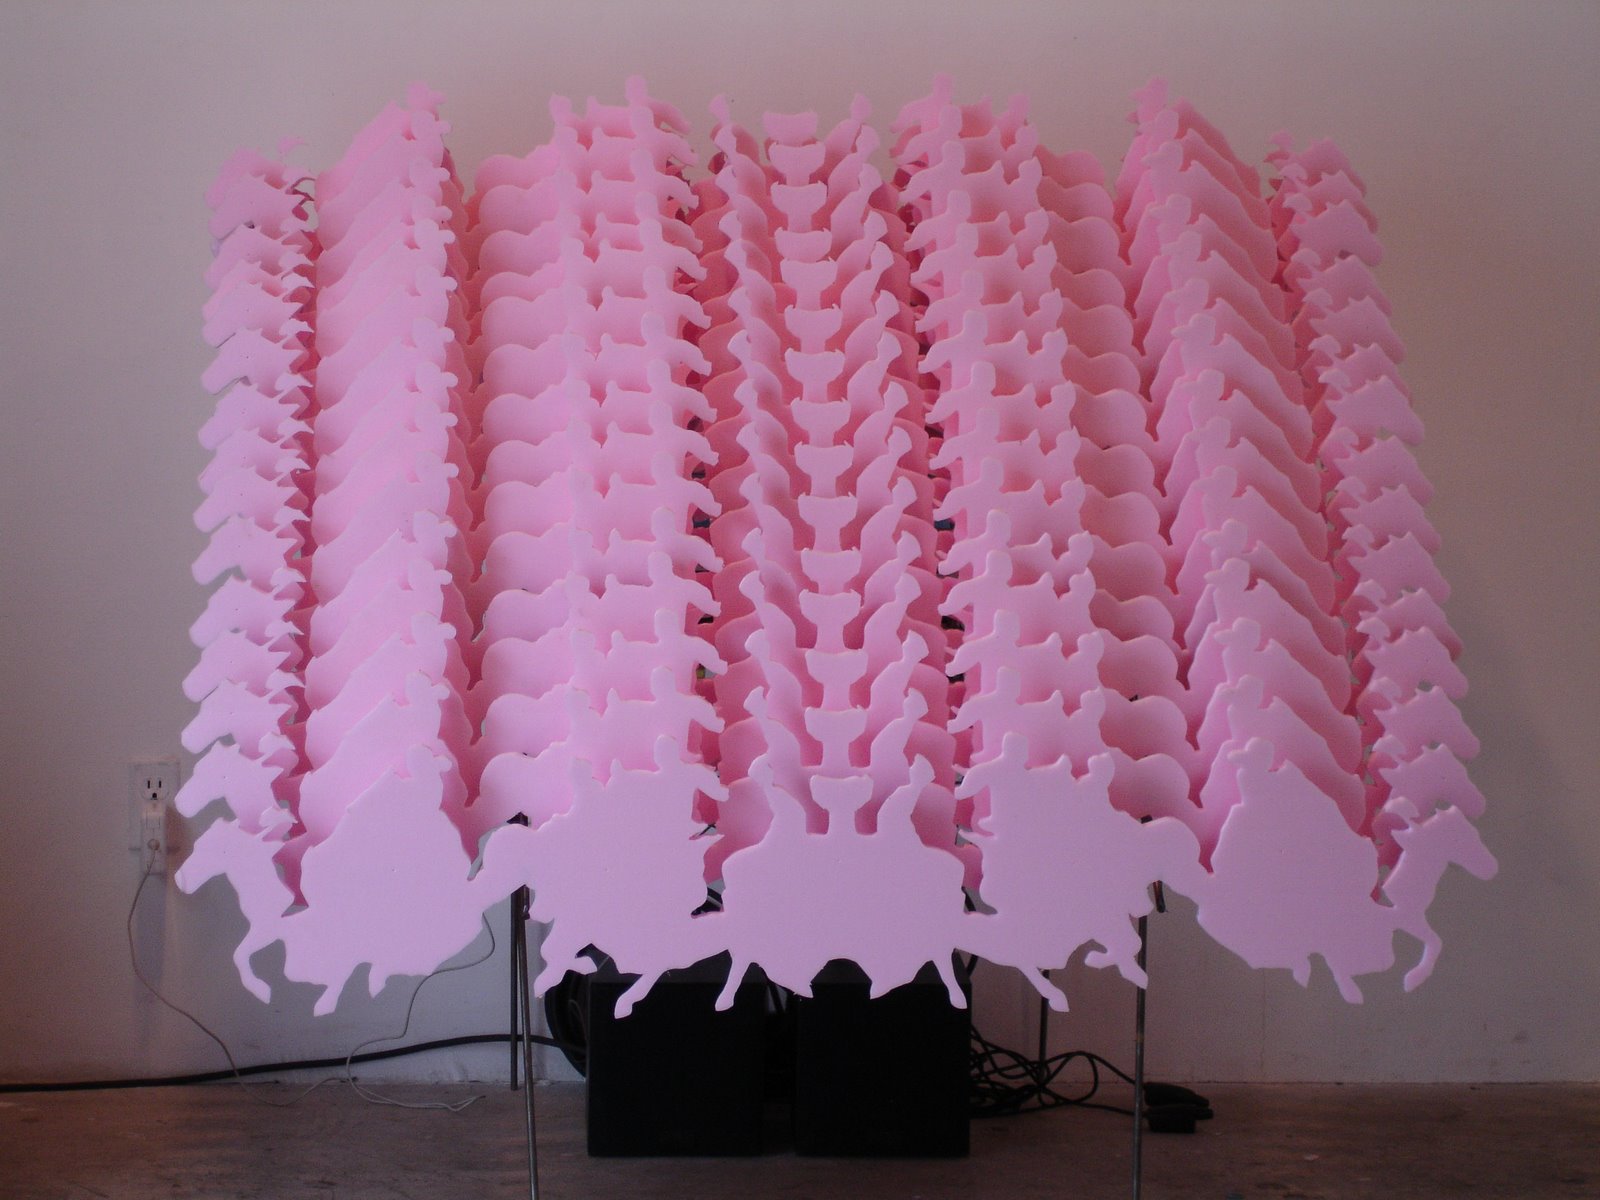 Model for the Monument for the Over Pink Mountain, 2007, steel, electronics, sound, pink construction foam